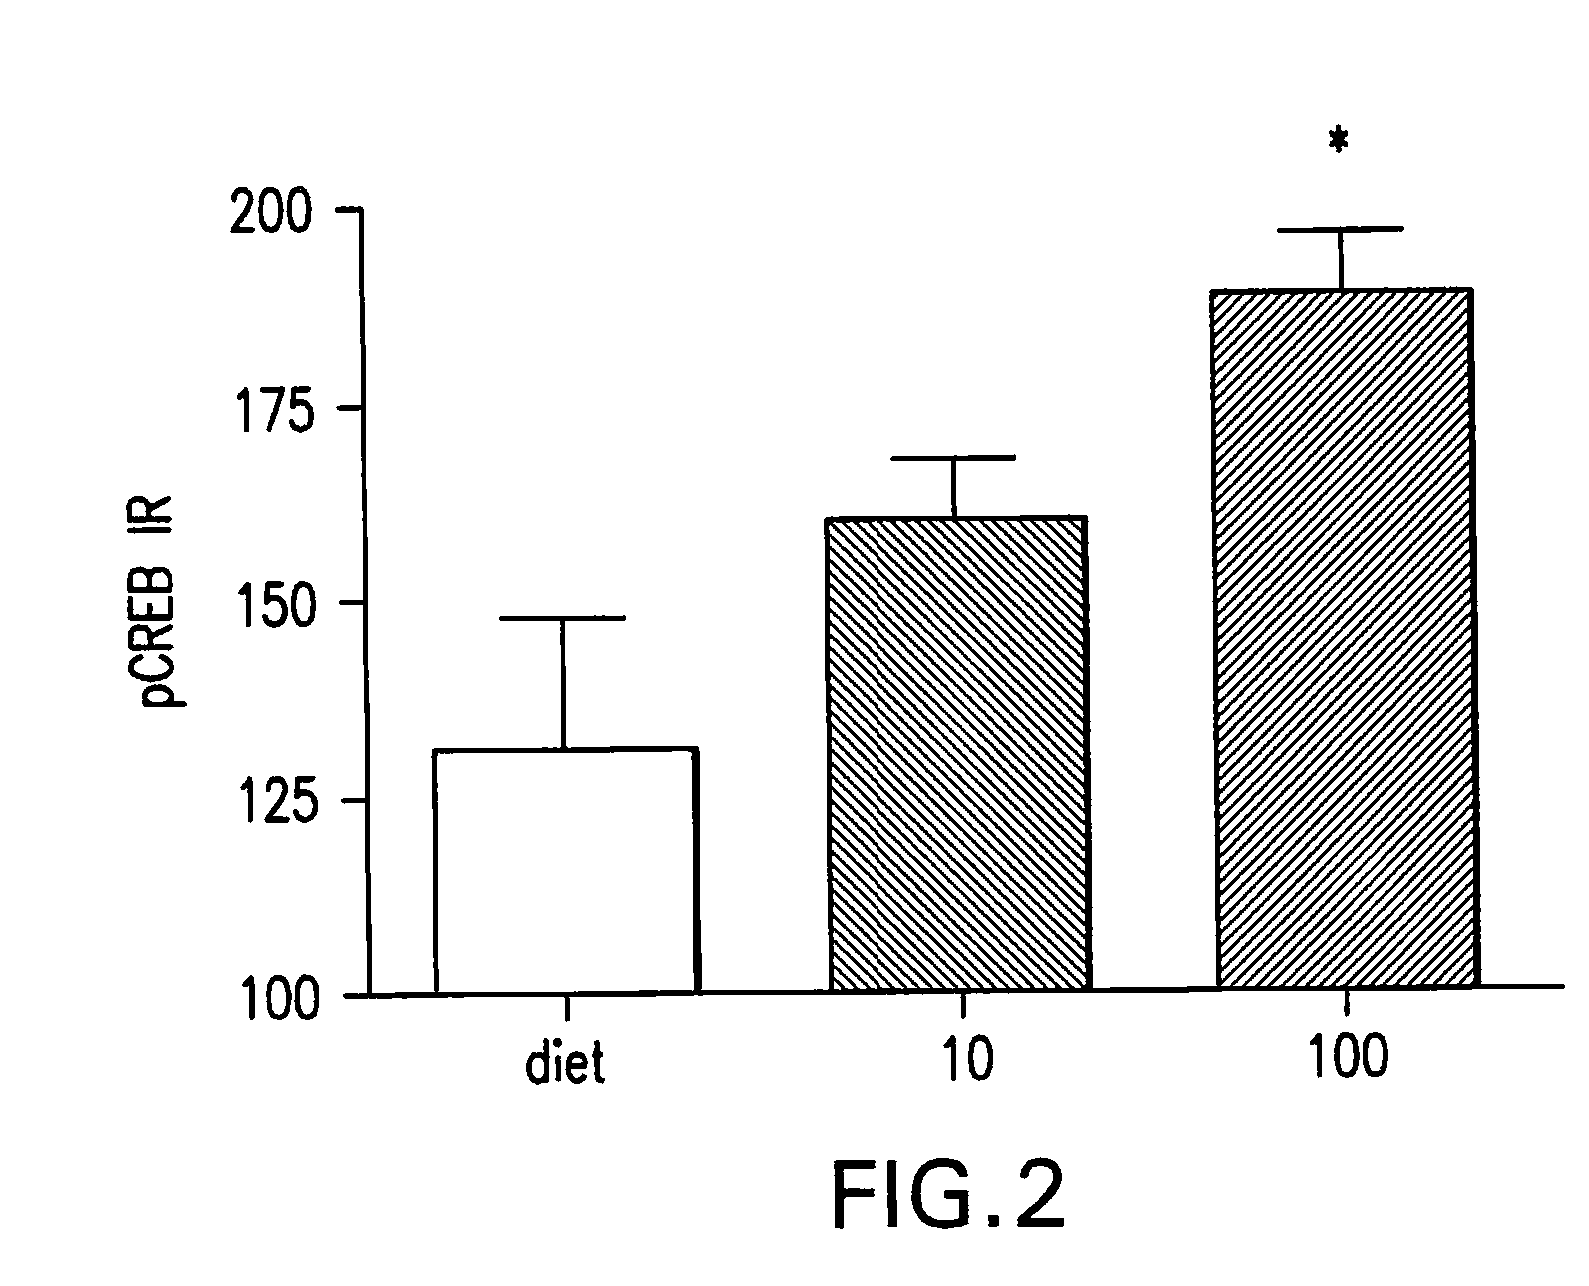 Methods of use of inhibitors of the 11-beta-hydroxysteroid dehydrogenase type 1 enzyme